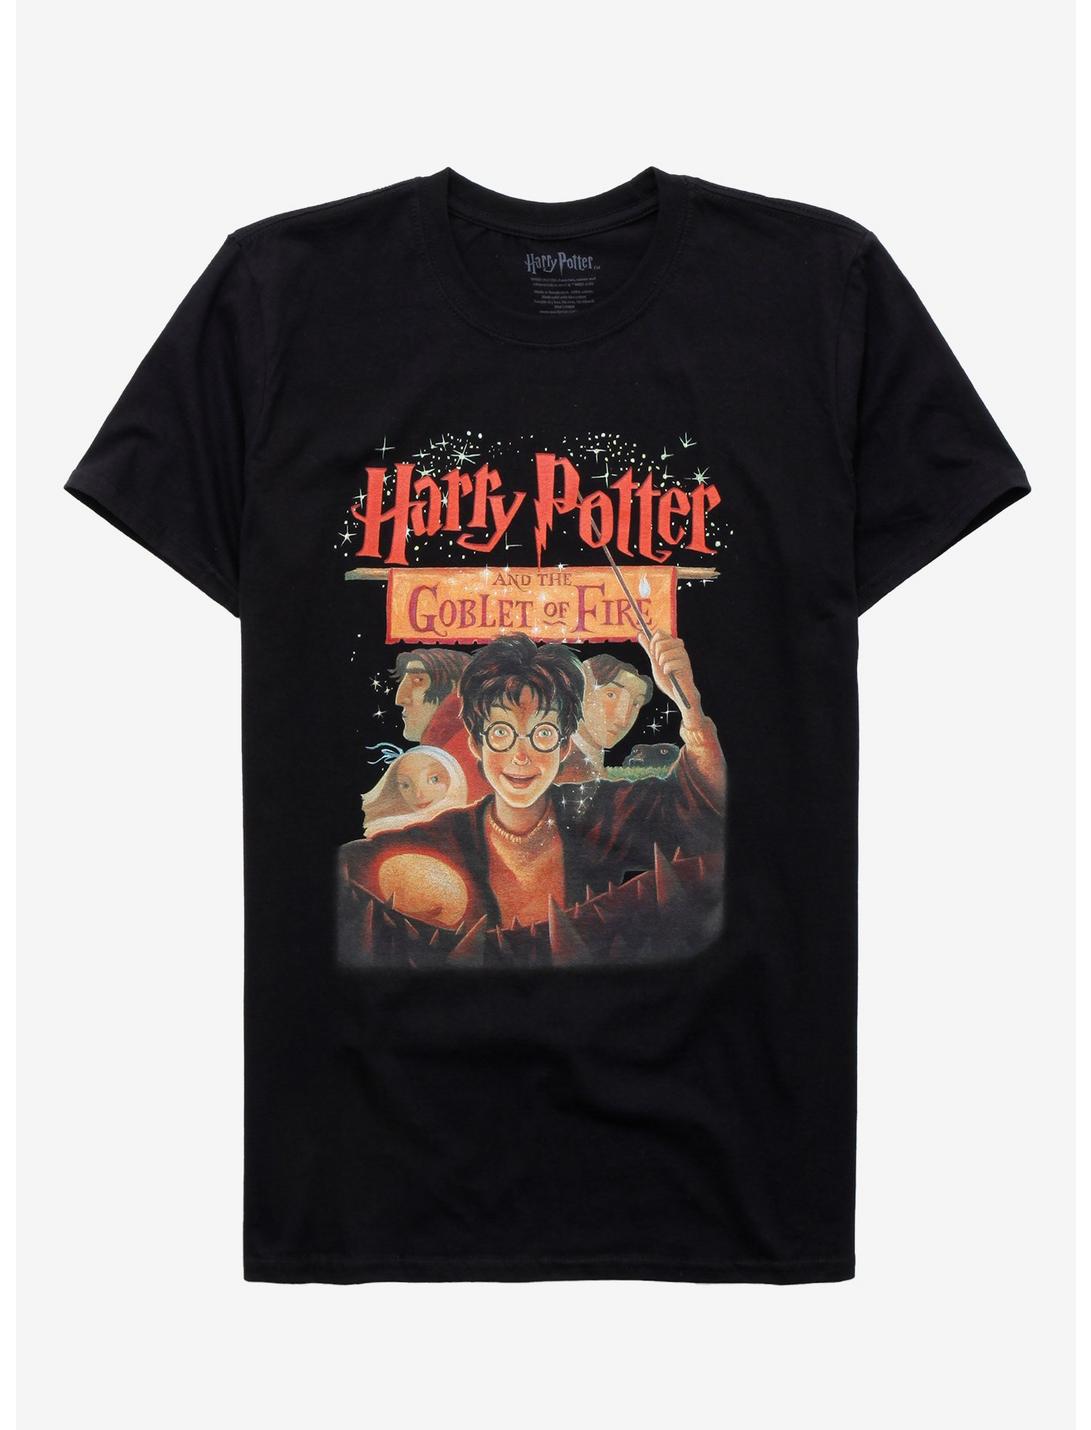 Harry Potter And The Goblet Of Fire Book Cover T-Shirt, BLACK, hi-res